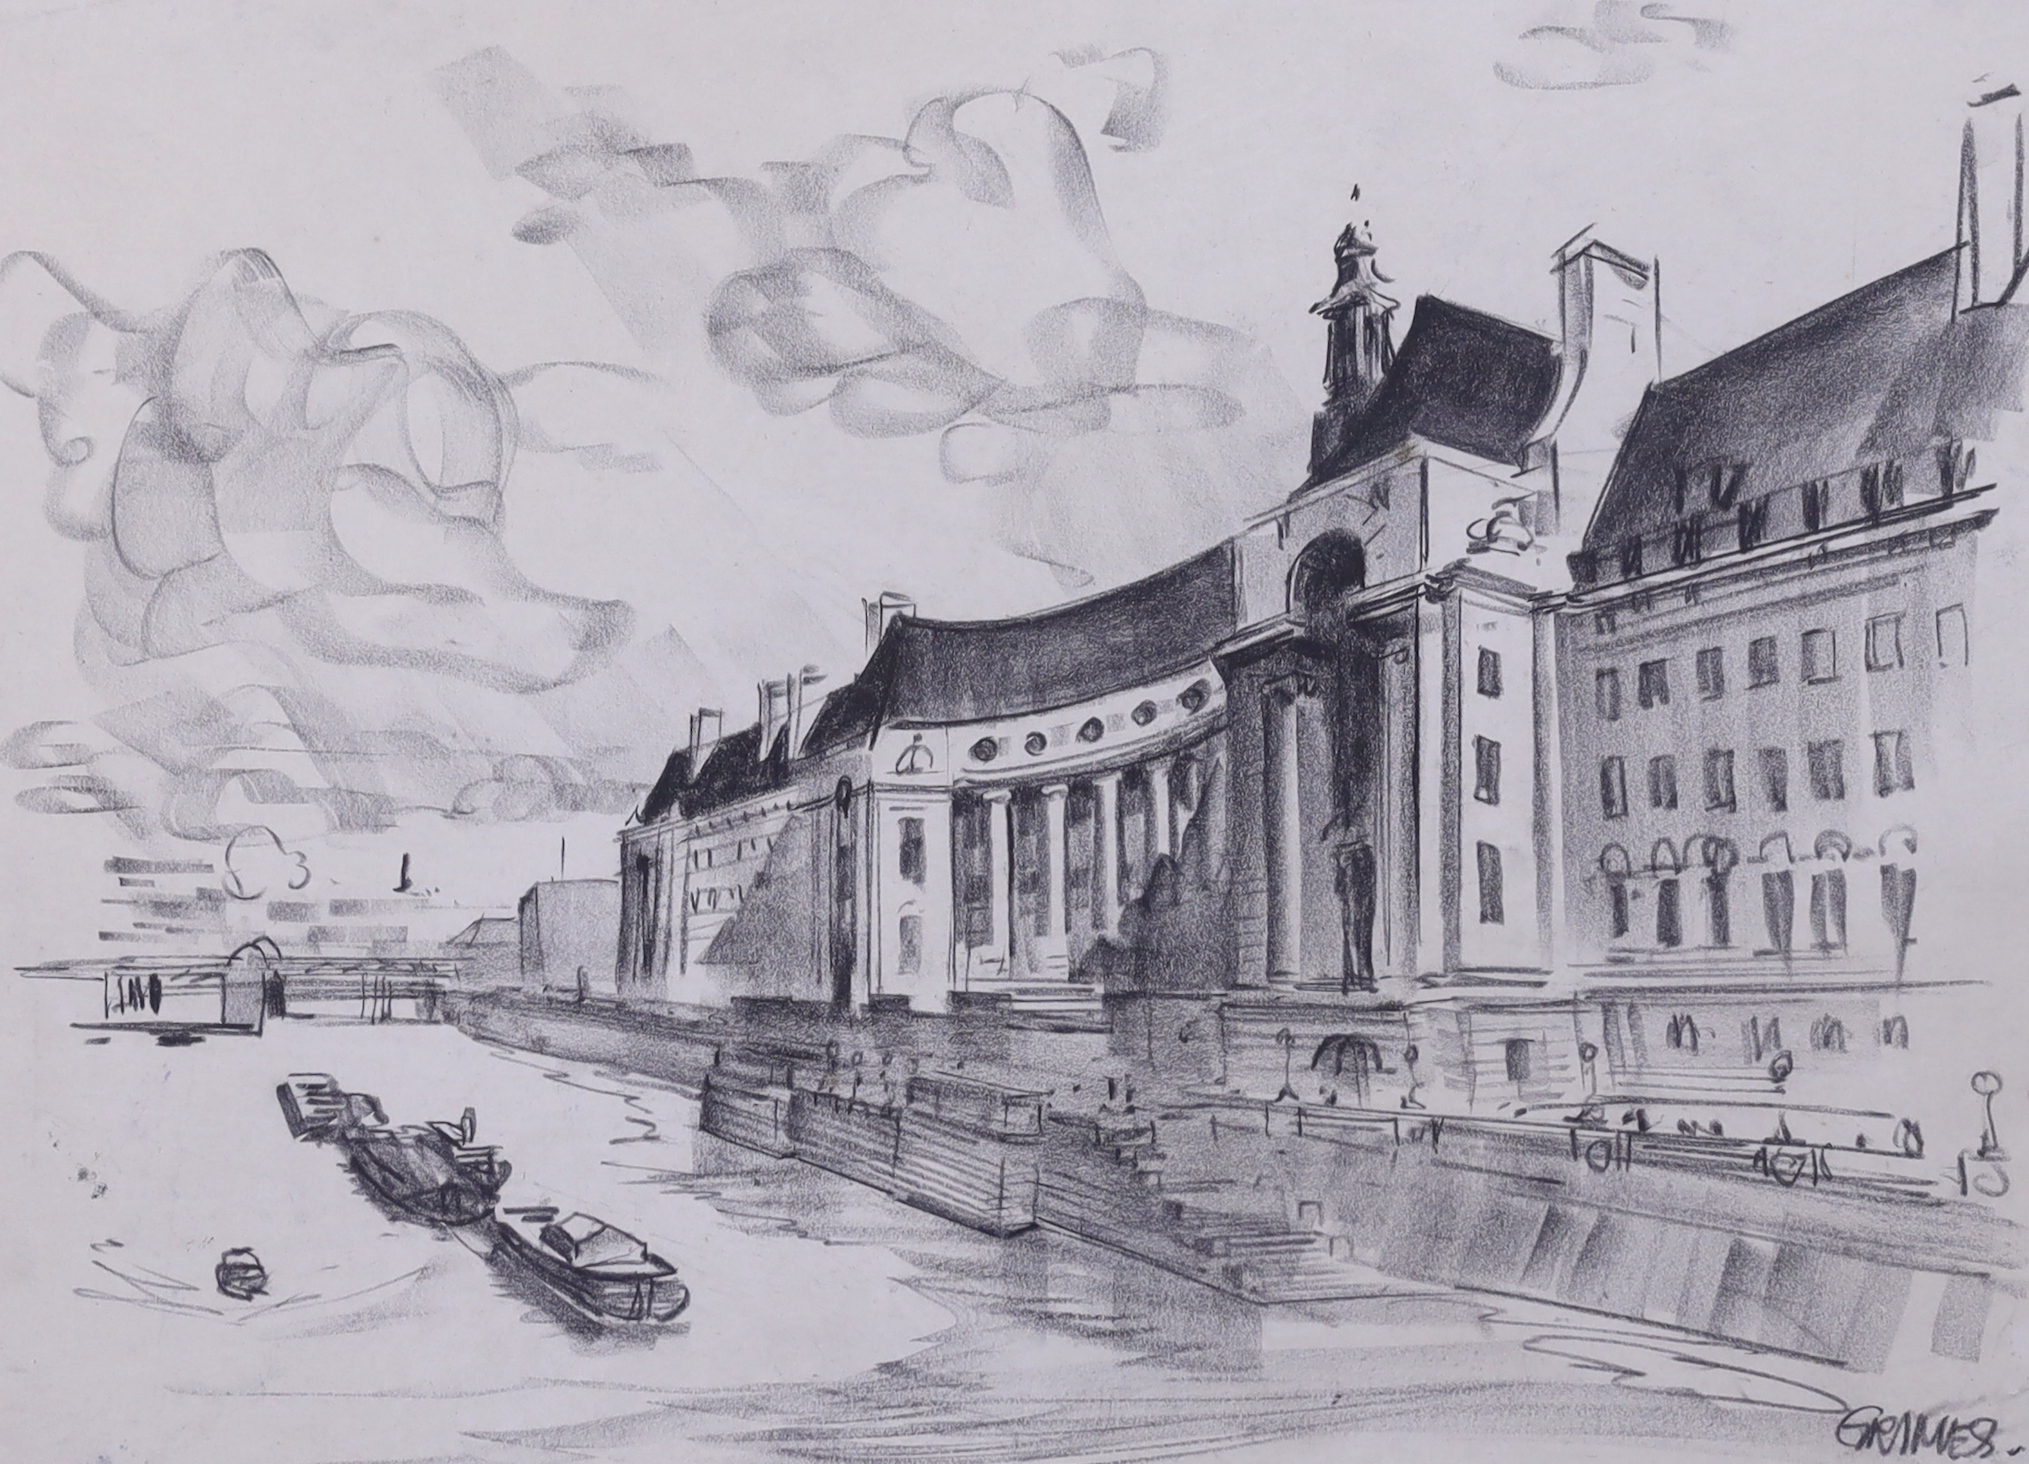 Leslie Grimes (1897-1983), charcoal drawing, 'The London County Hall', signed, various inscriptions verso including cartoonist of The Star, 48 x 34cm